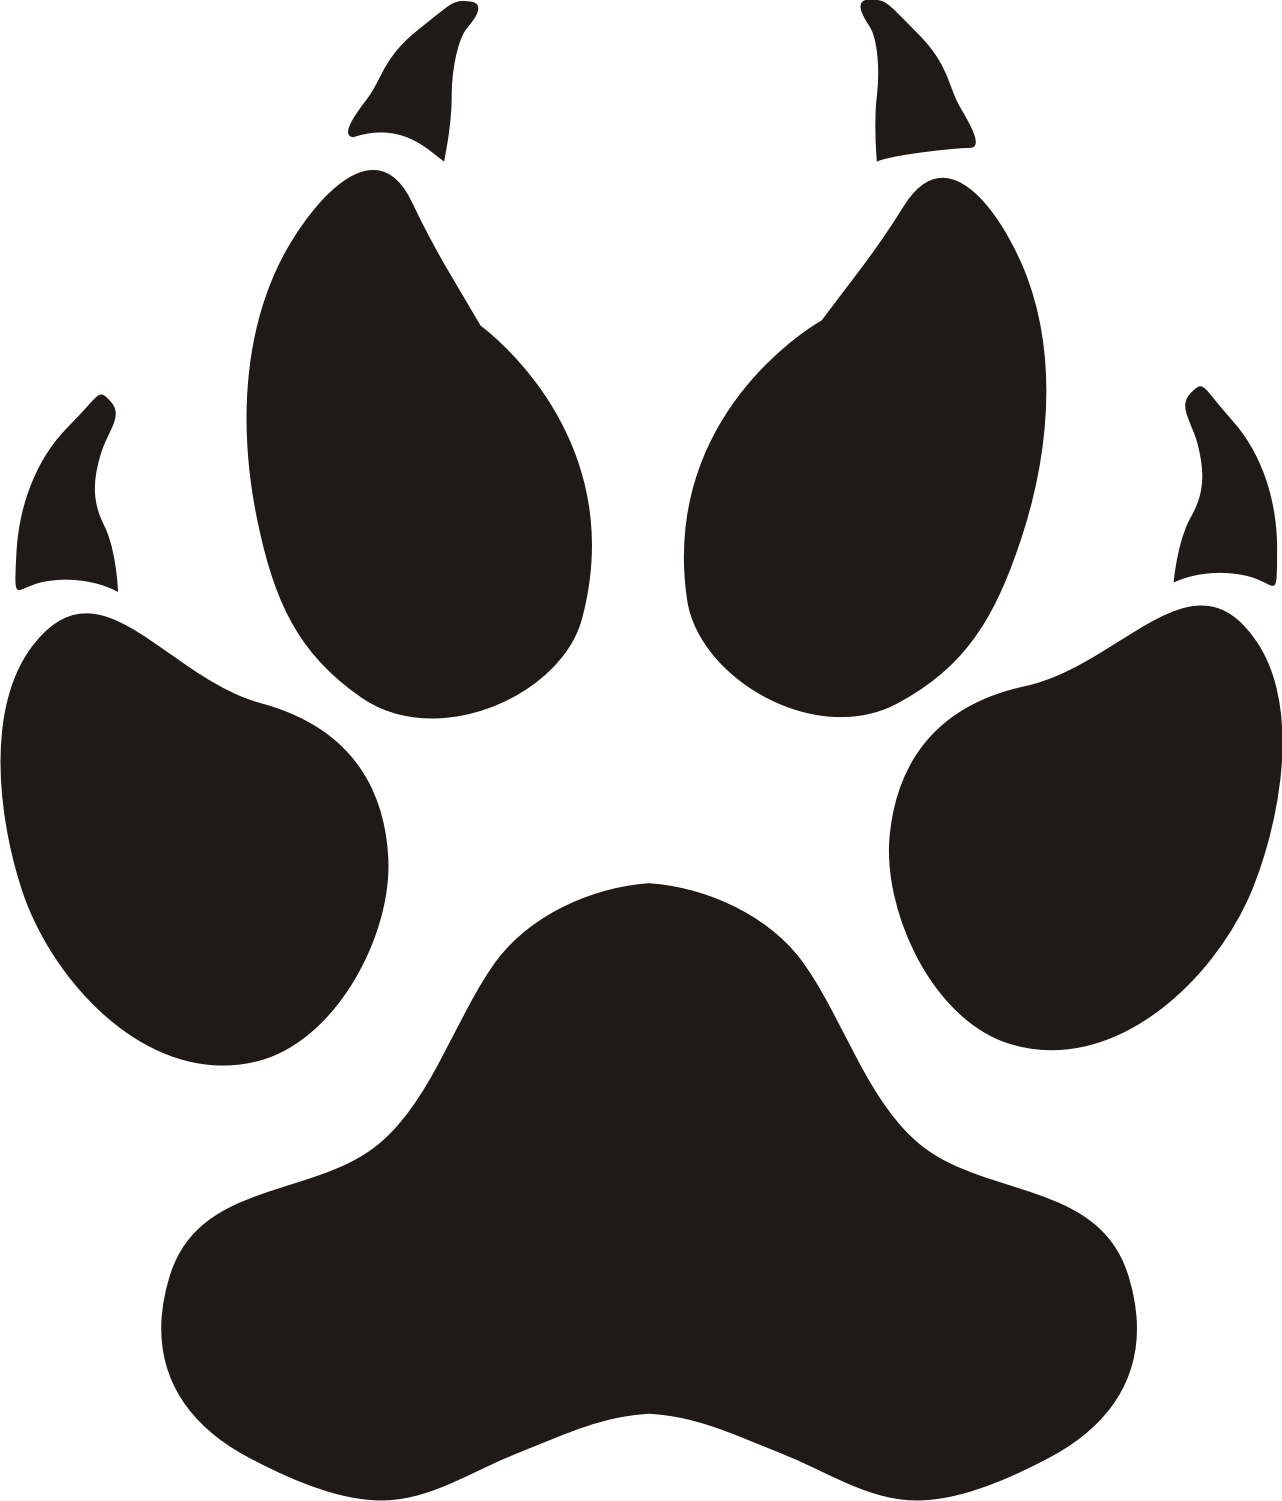 Wolf Paw Print Logo - Free Dog Paw Print Outline, Download Free Clip Art, Free Clip Art on ...